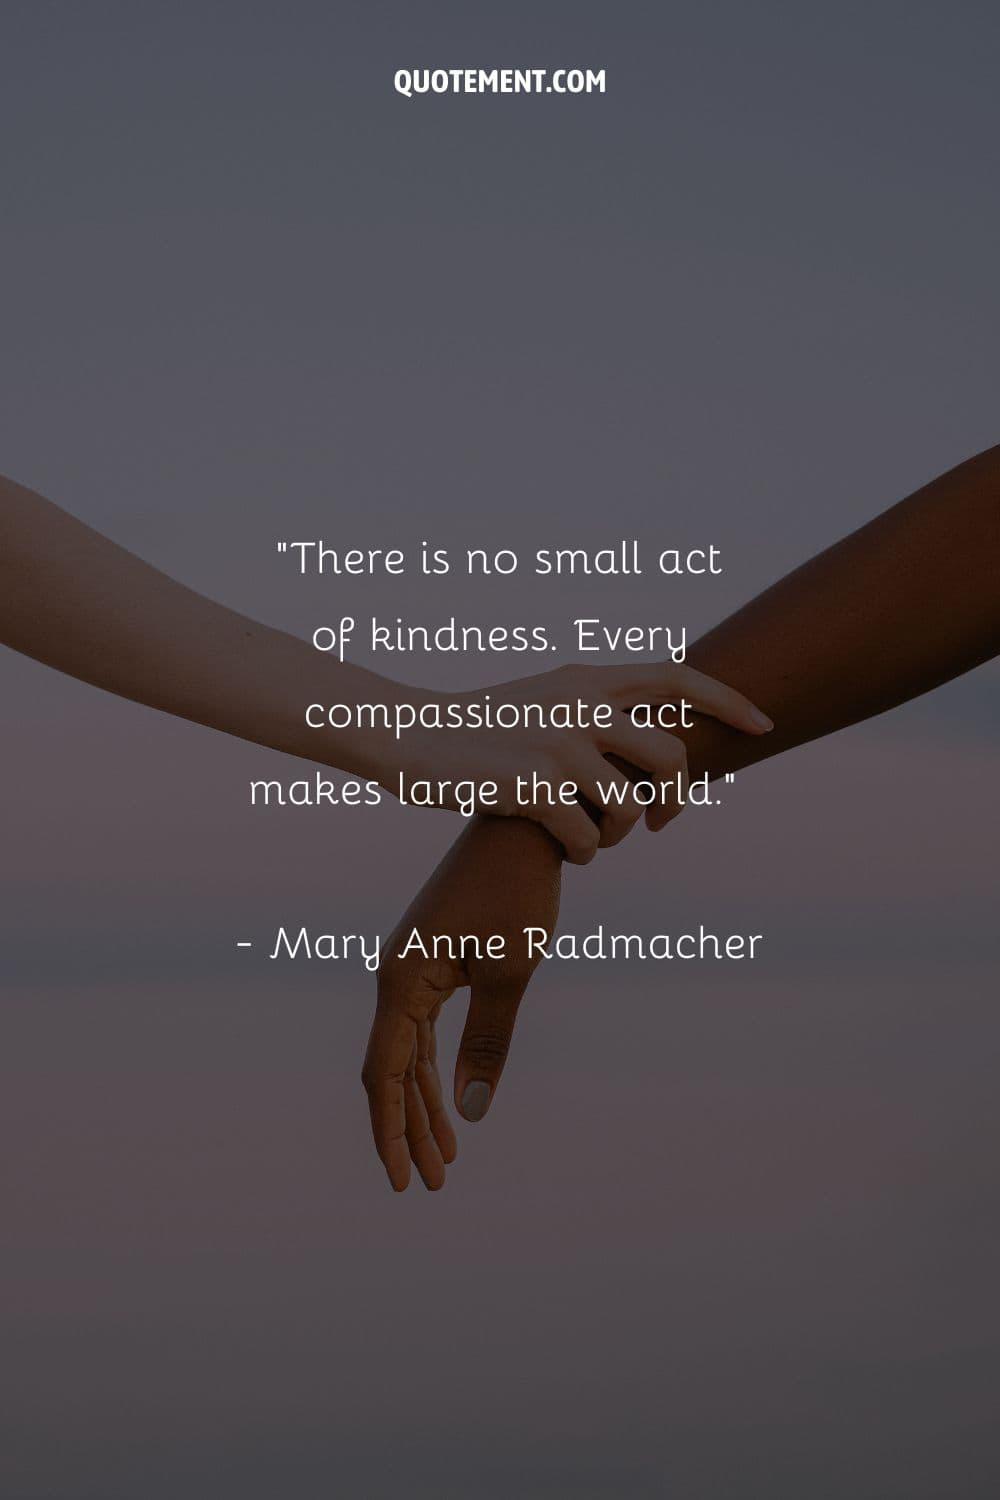 There is no small act of kindness.